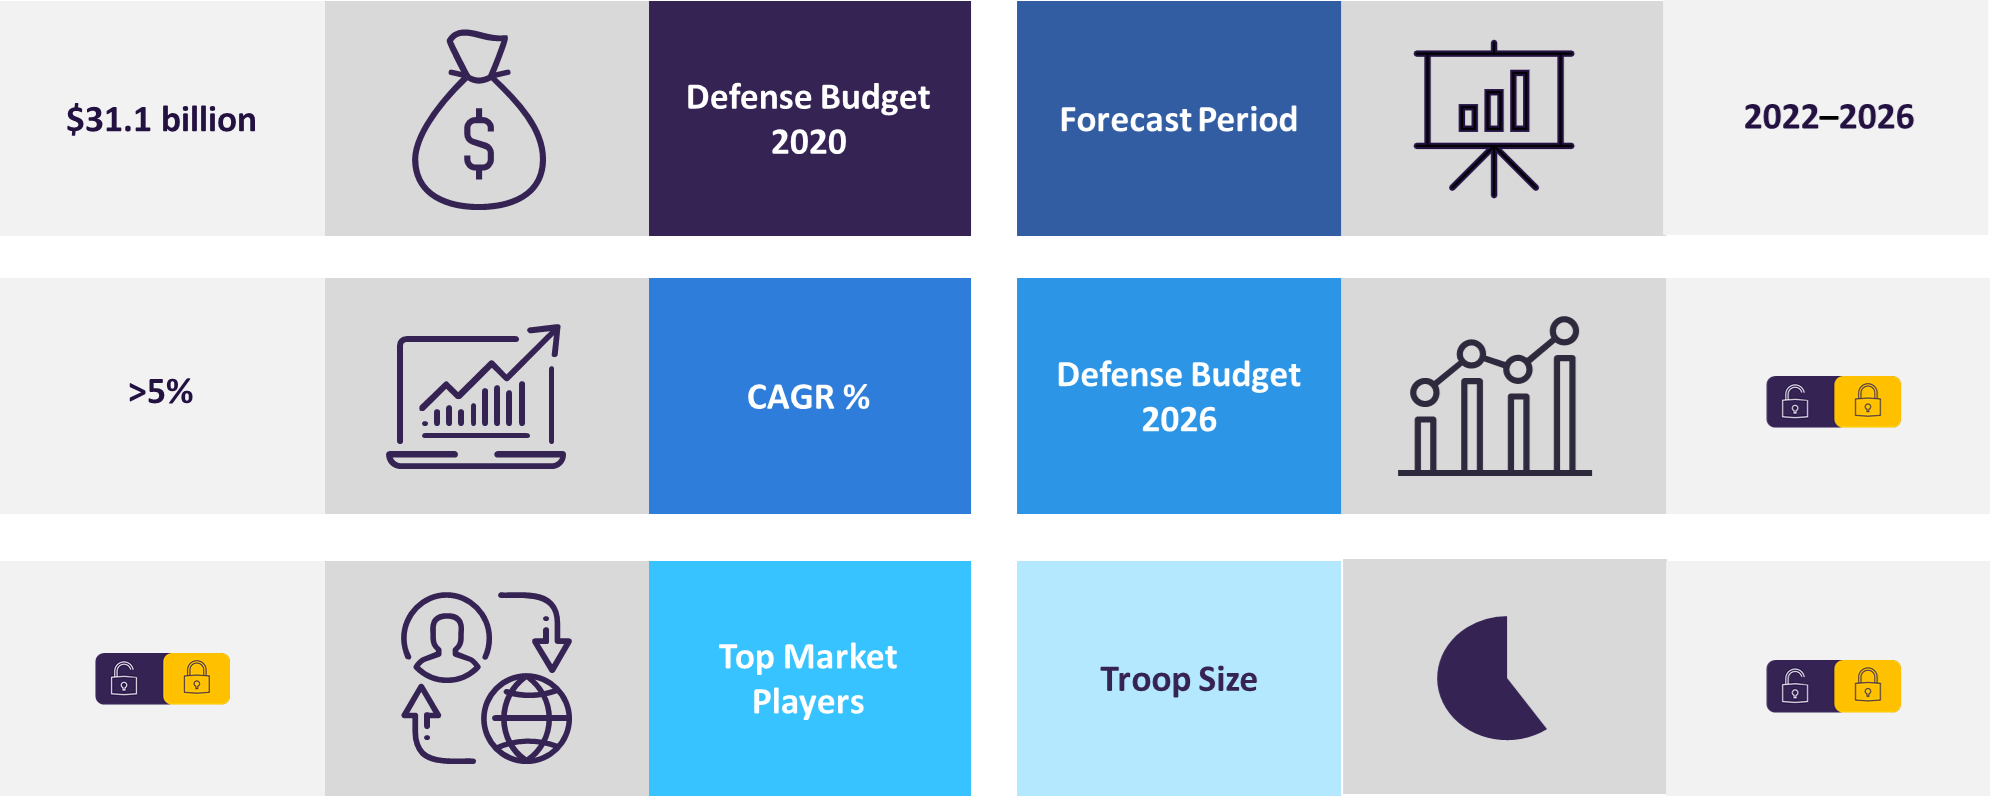 Overview of the defense market in Australia